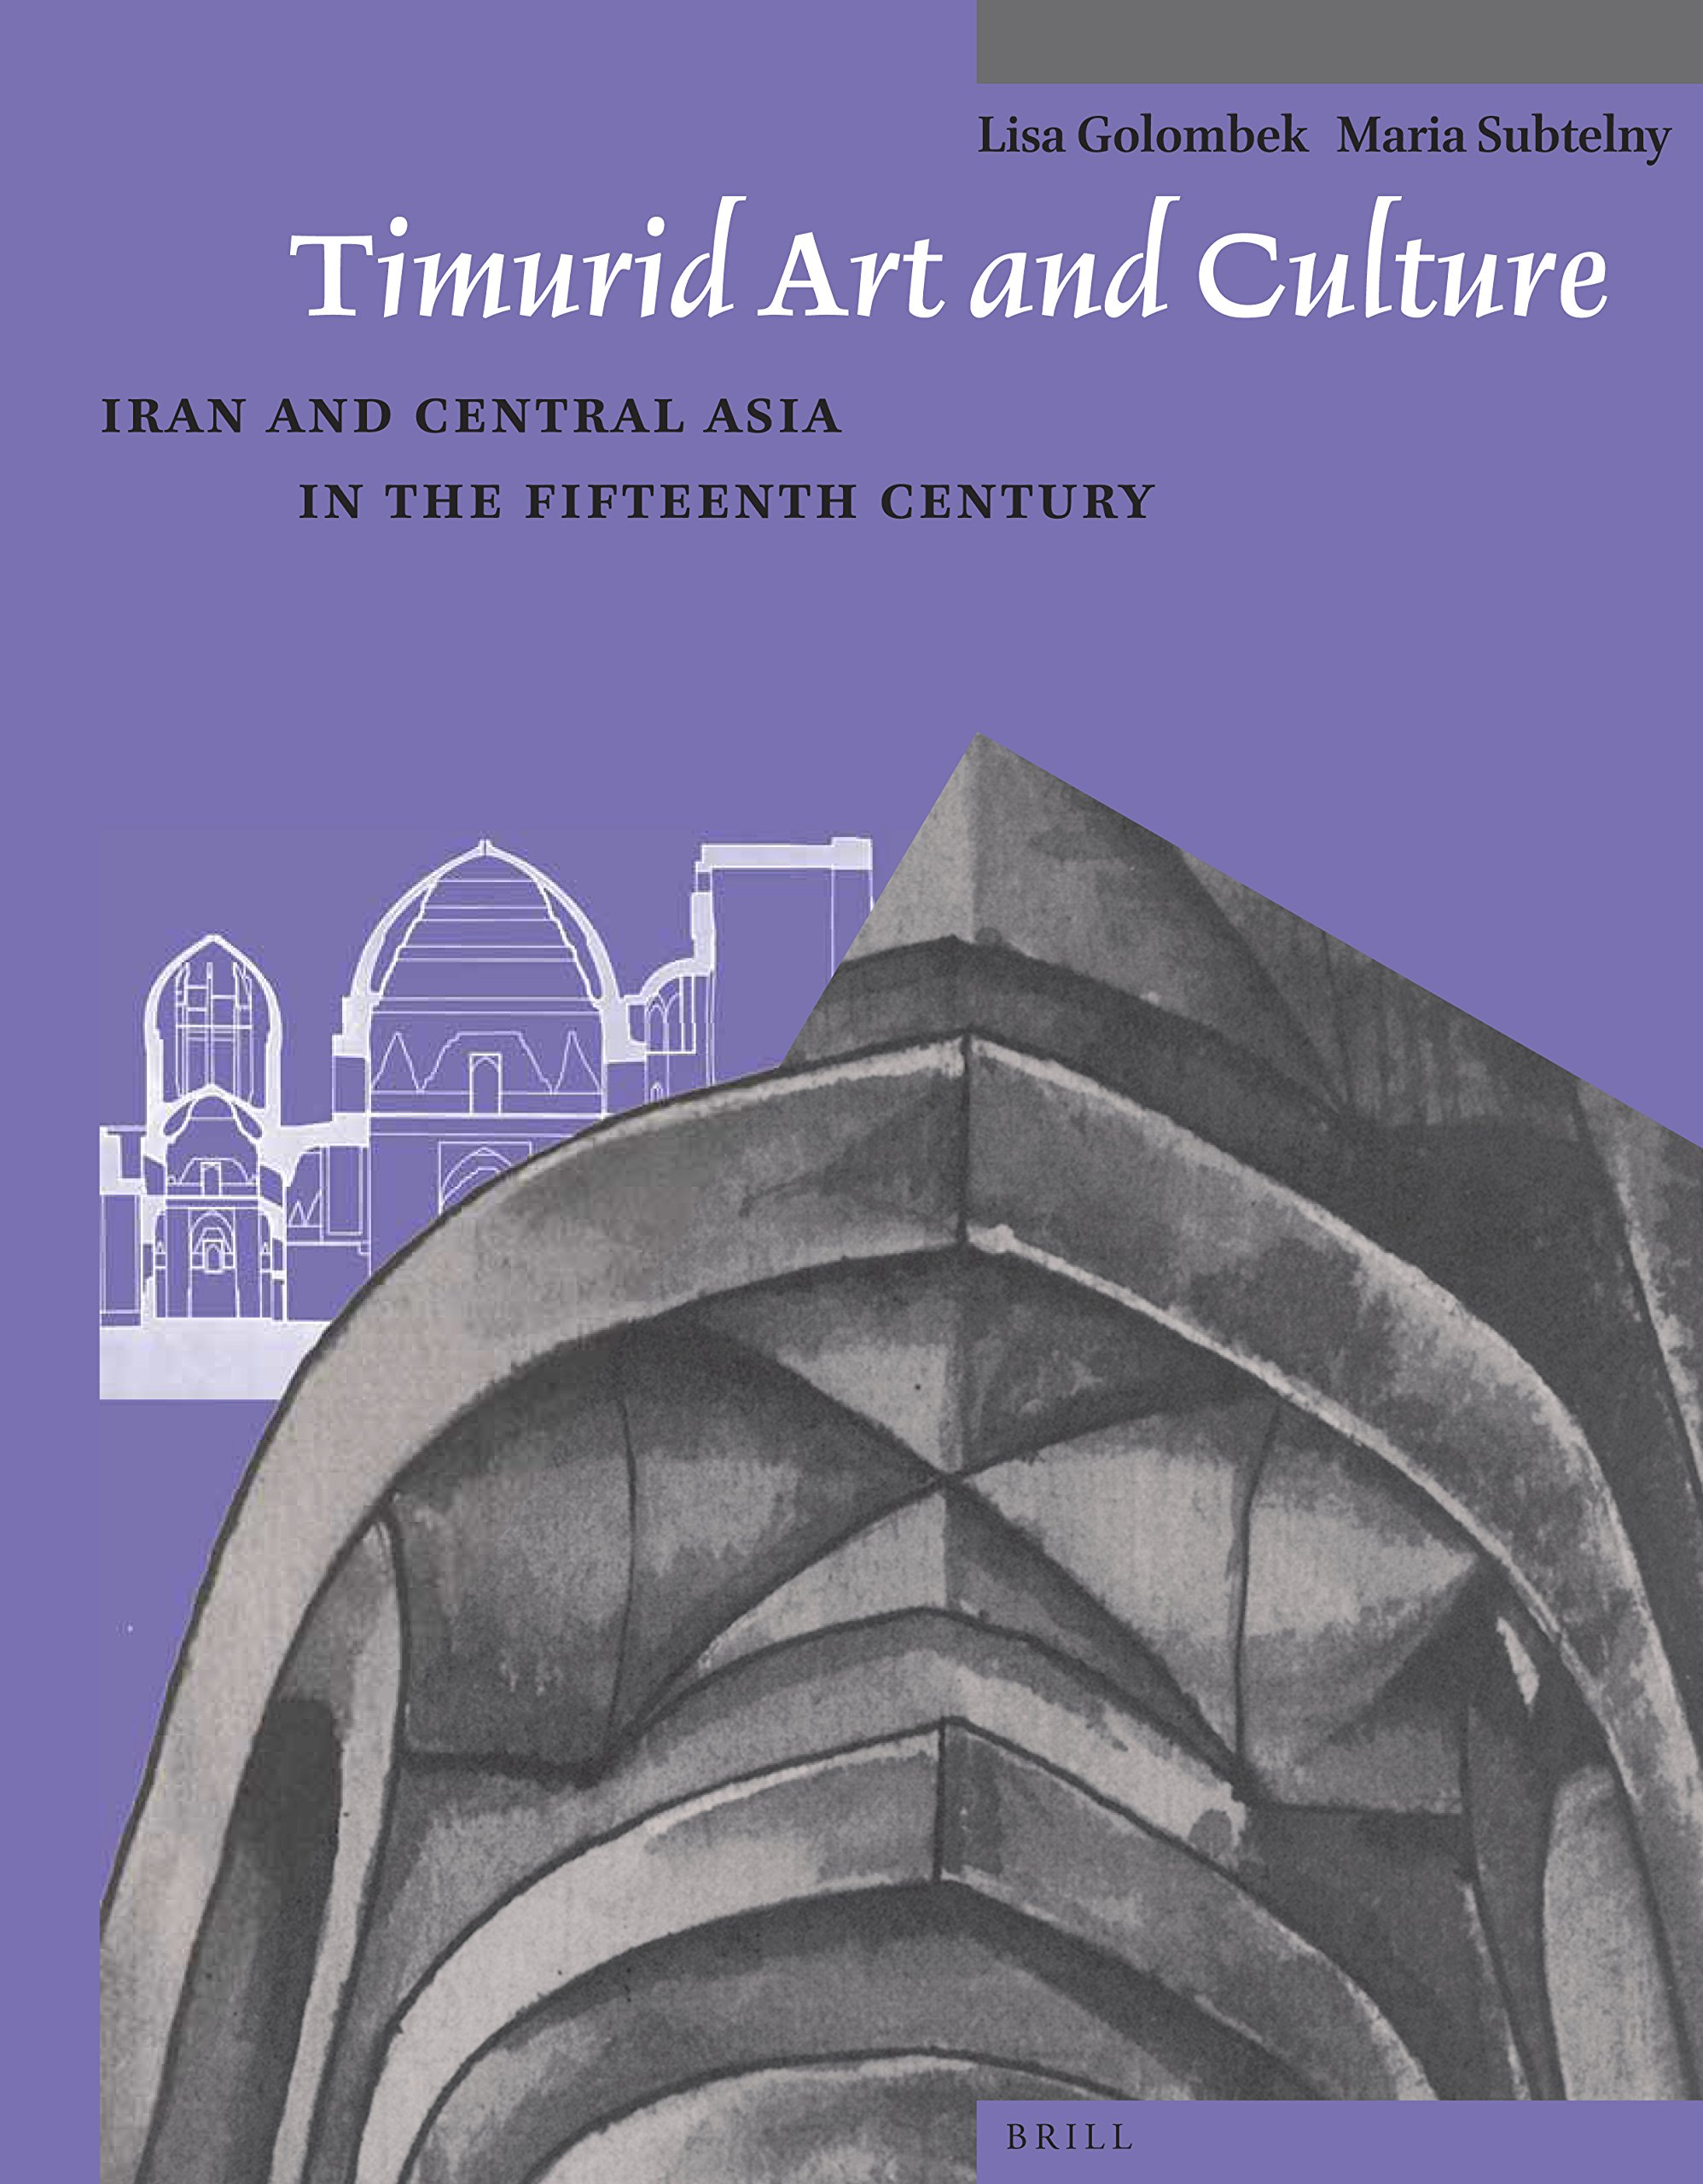 Timurid Art and Culture: Iran and Central Asia in the Fifteenth Century - Supplements to Muqarnas Volume VI